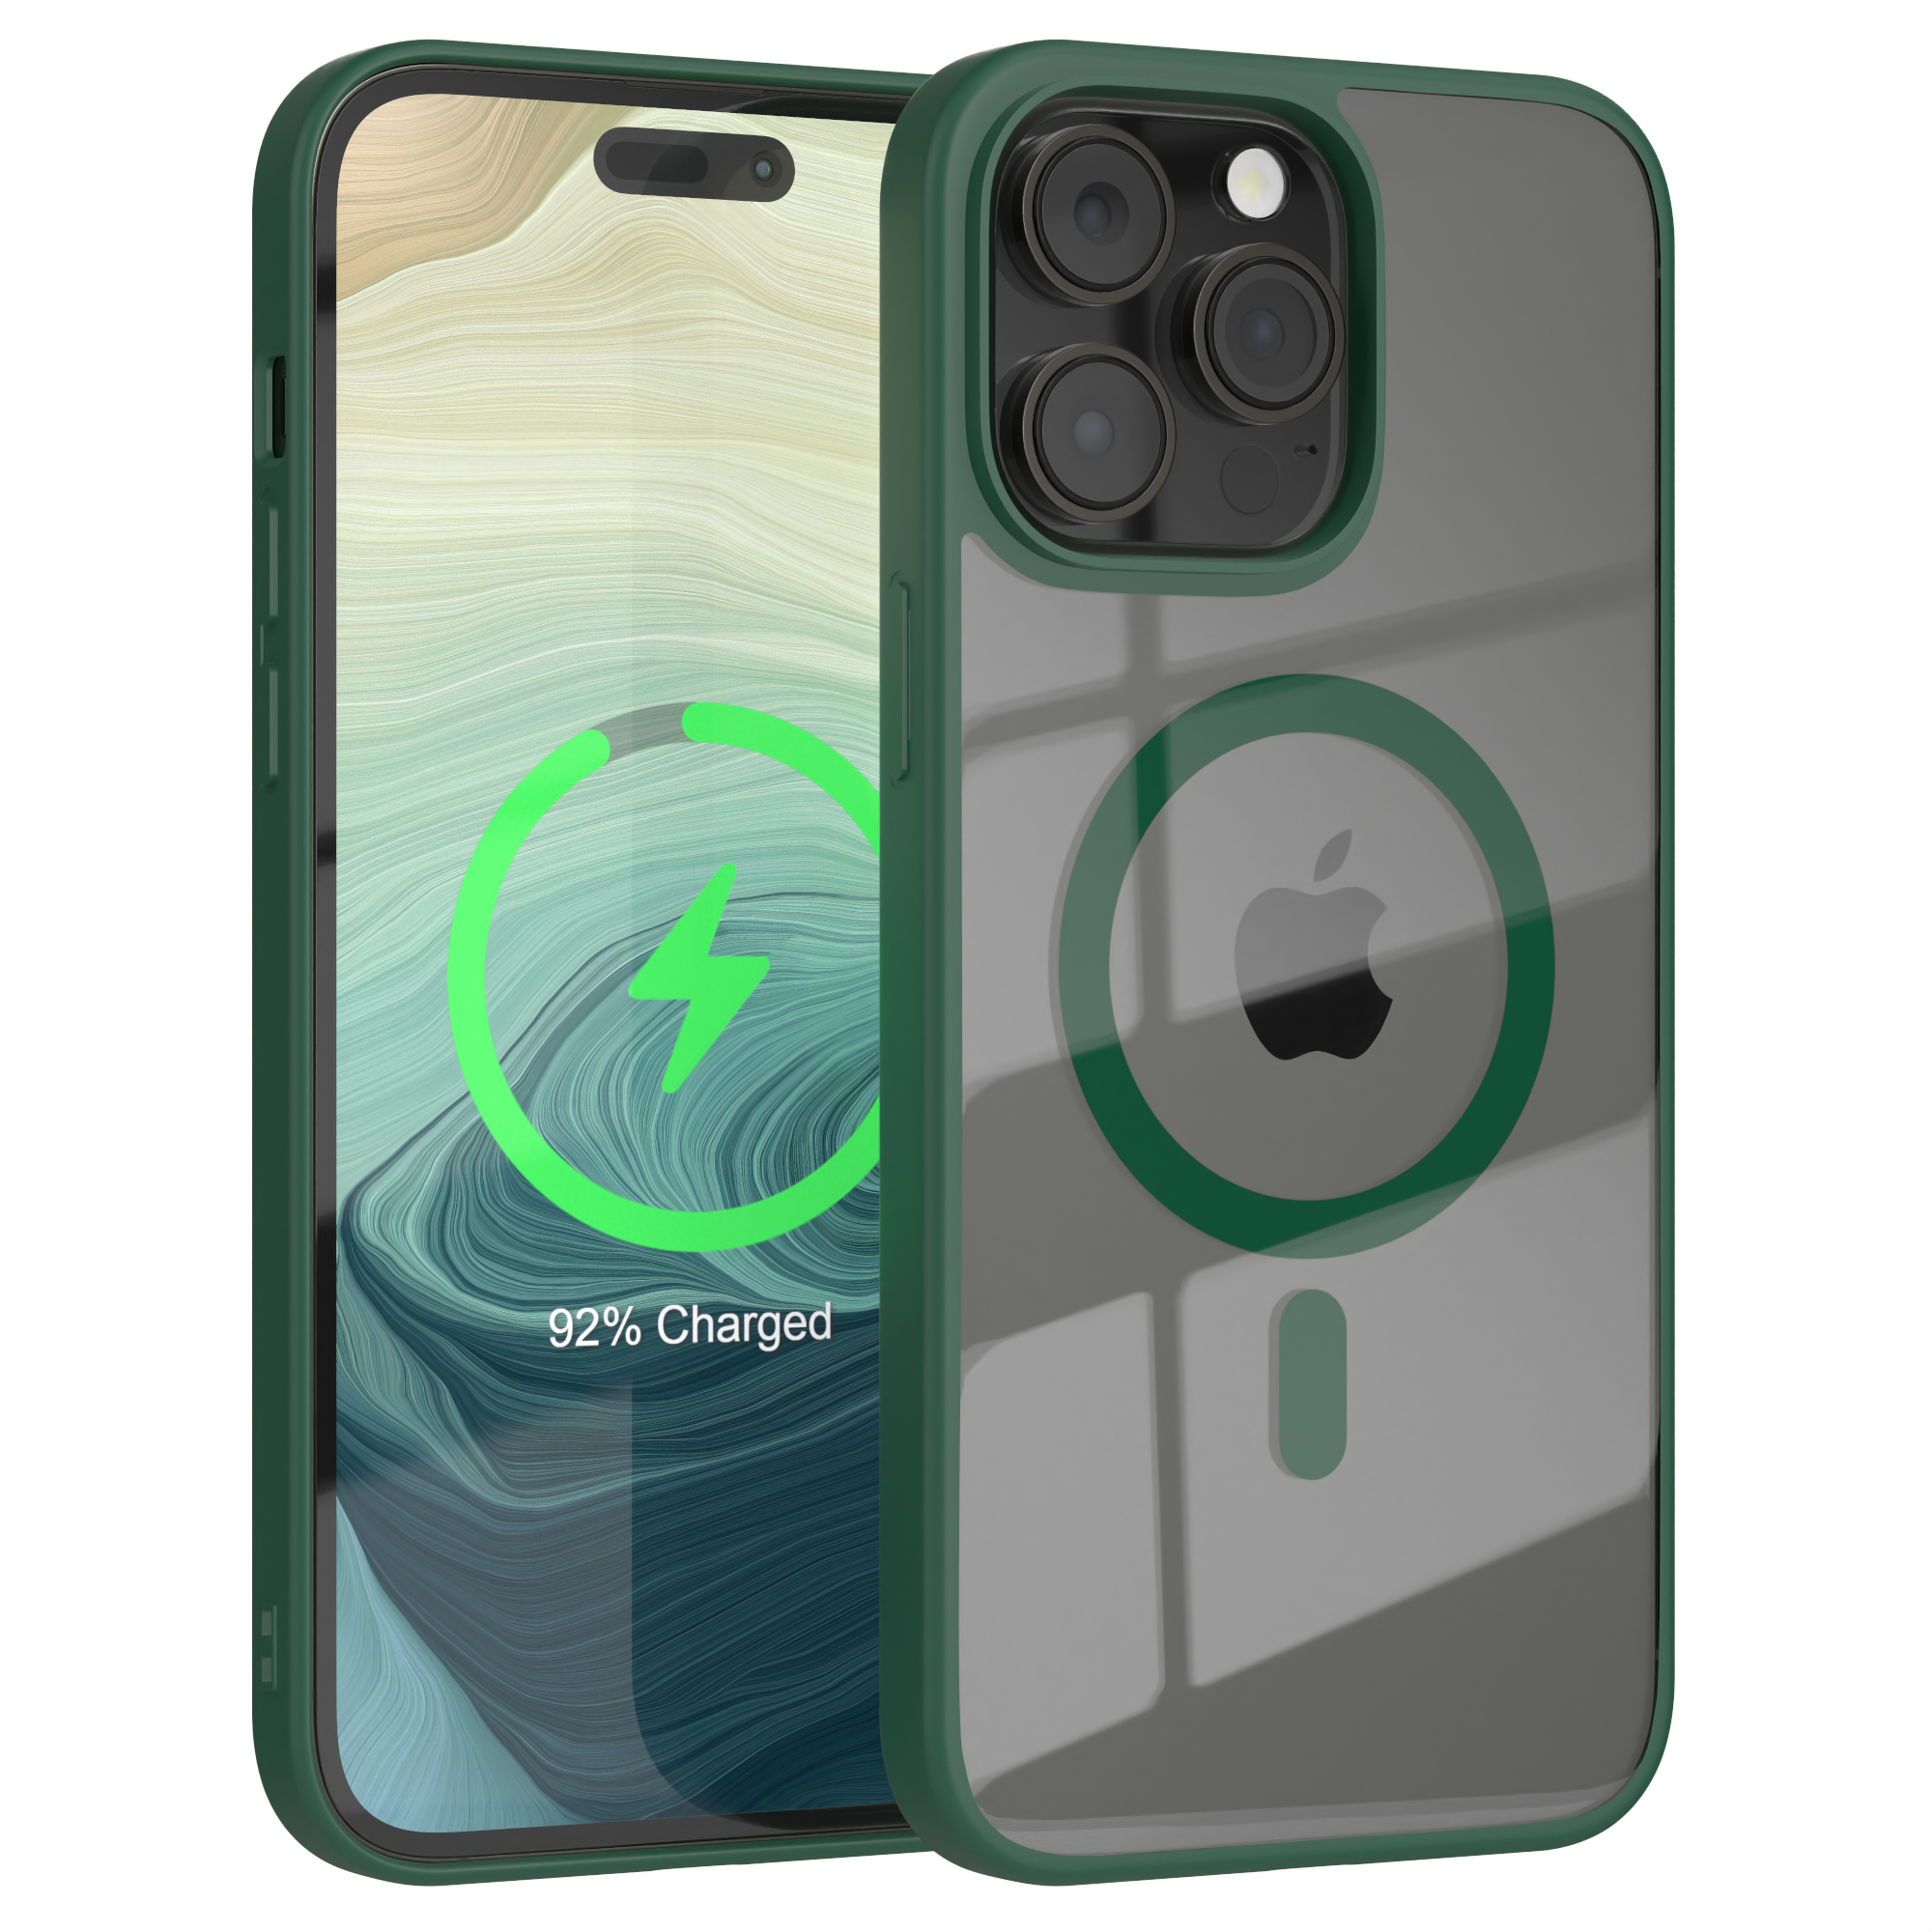 EAZY CASE Clear Cover mit 14 Pro Nachtgrün Max, Bumper, MagSafe, Apple, iPhone